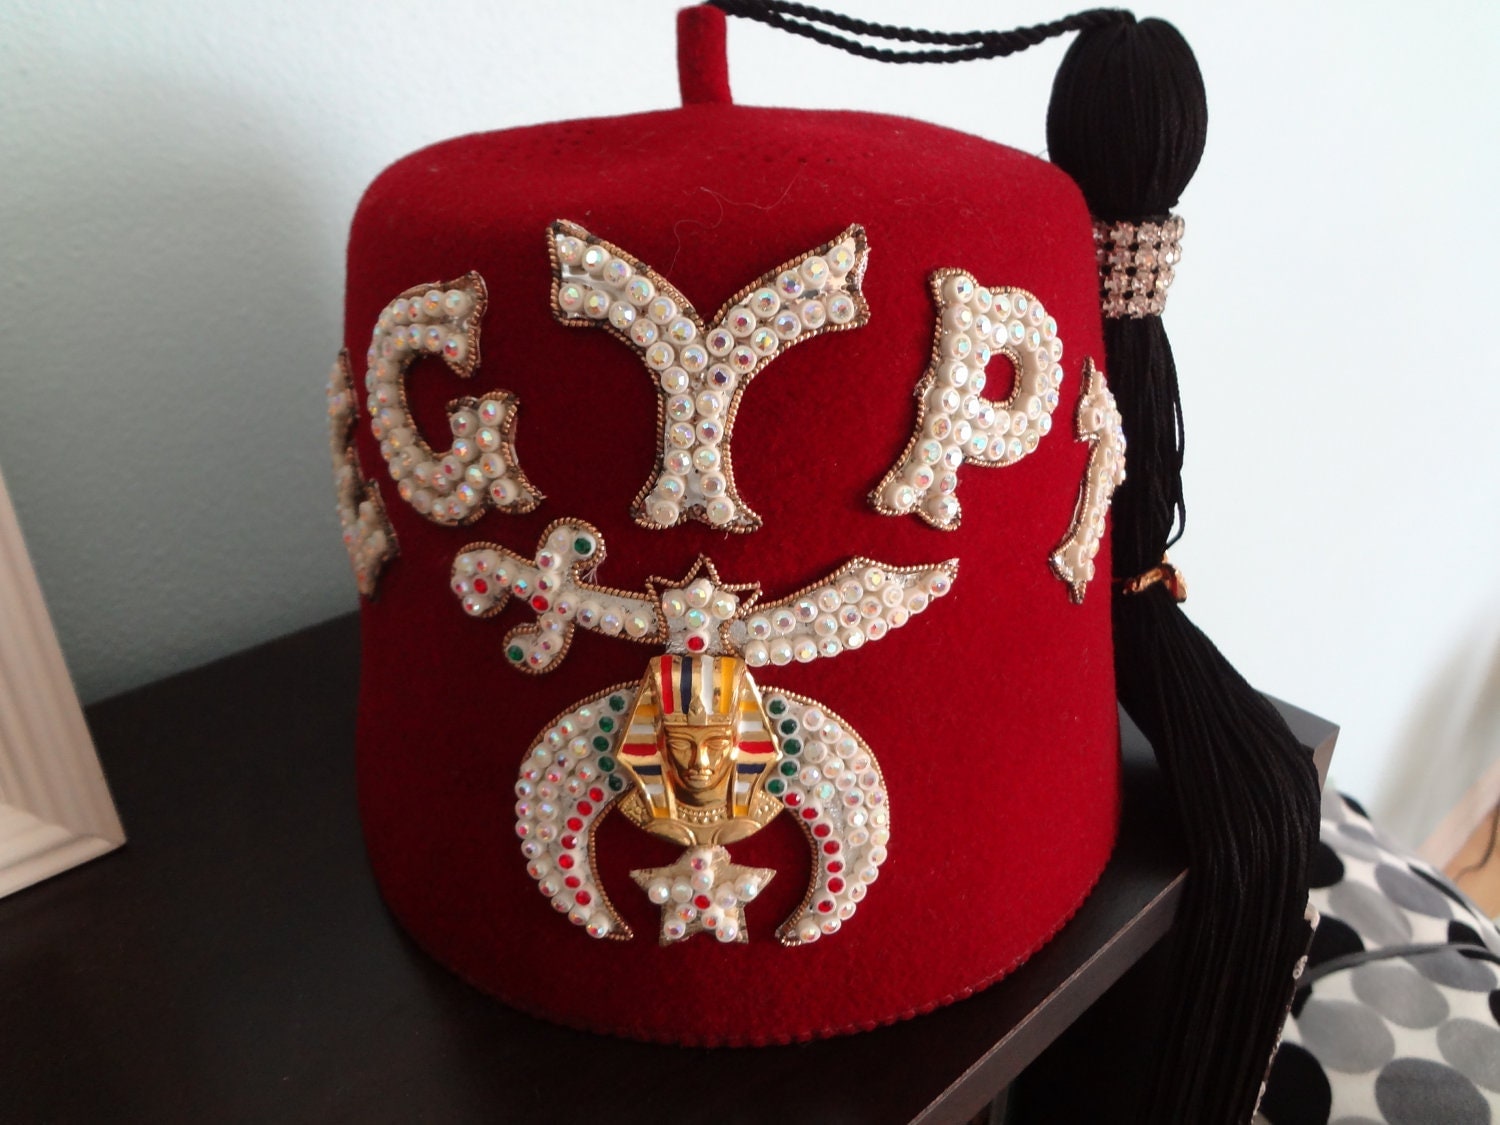 fez hat for sale